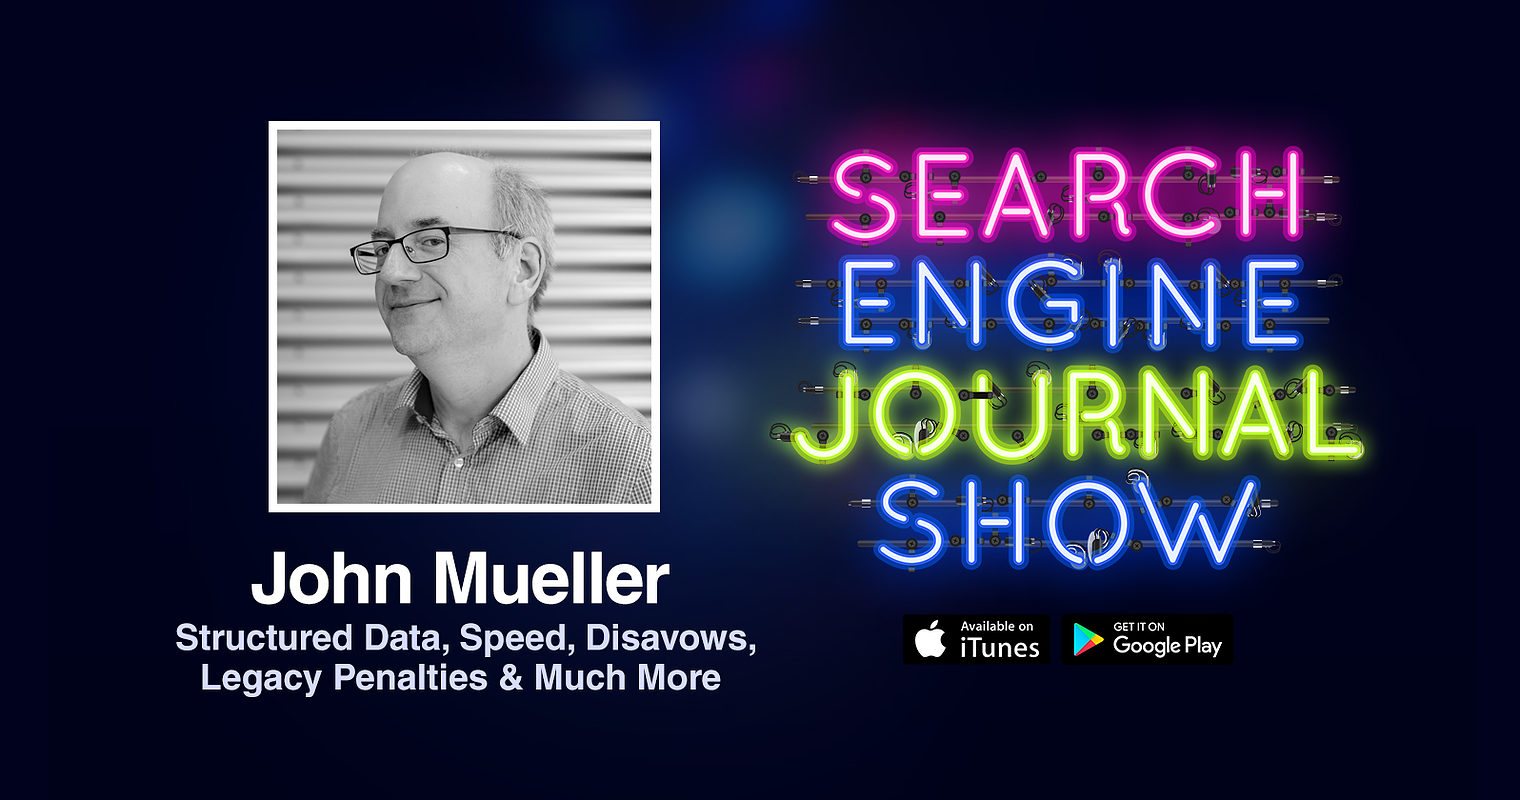 Google’s John Mueller on Structured Data, Speed, Disavows, Legacy Penalties & Much More [PODCAST]